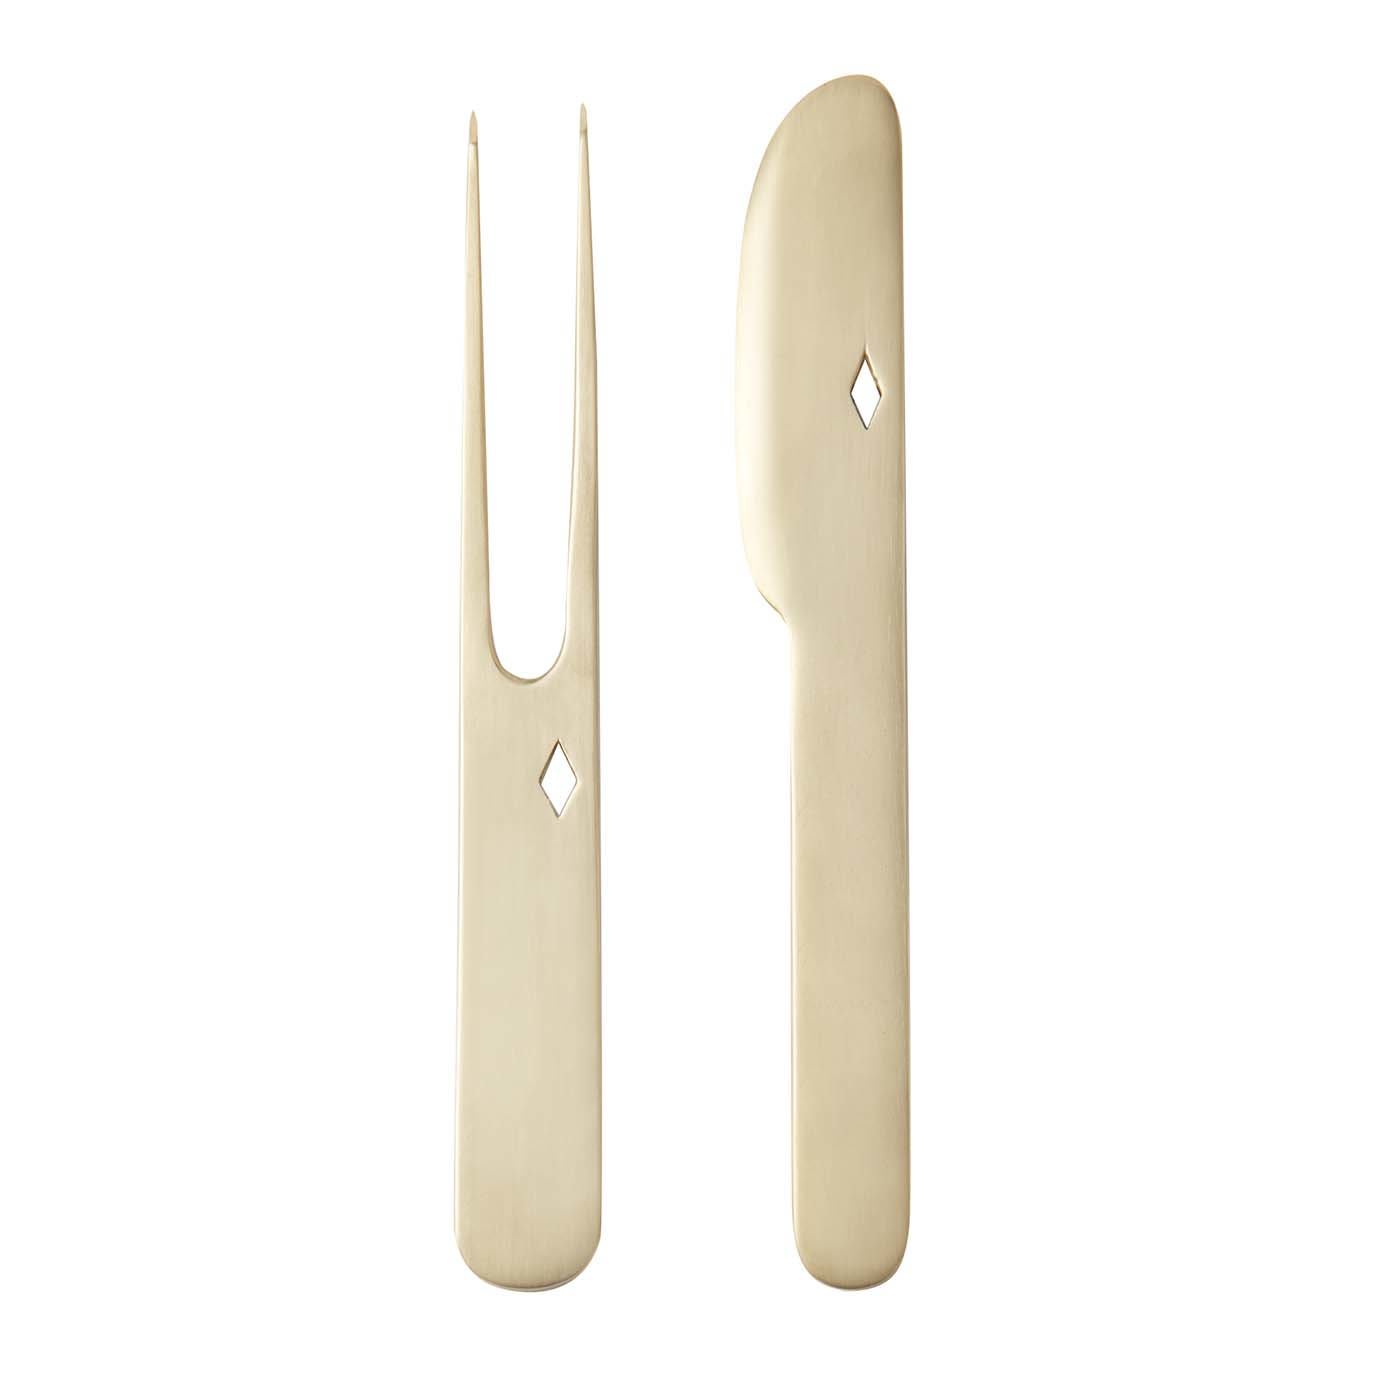 Regi Fruit Fork and Knife by Jaime Hayon Set for 2 - Paola C